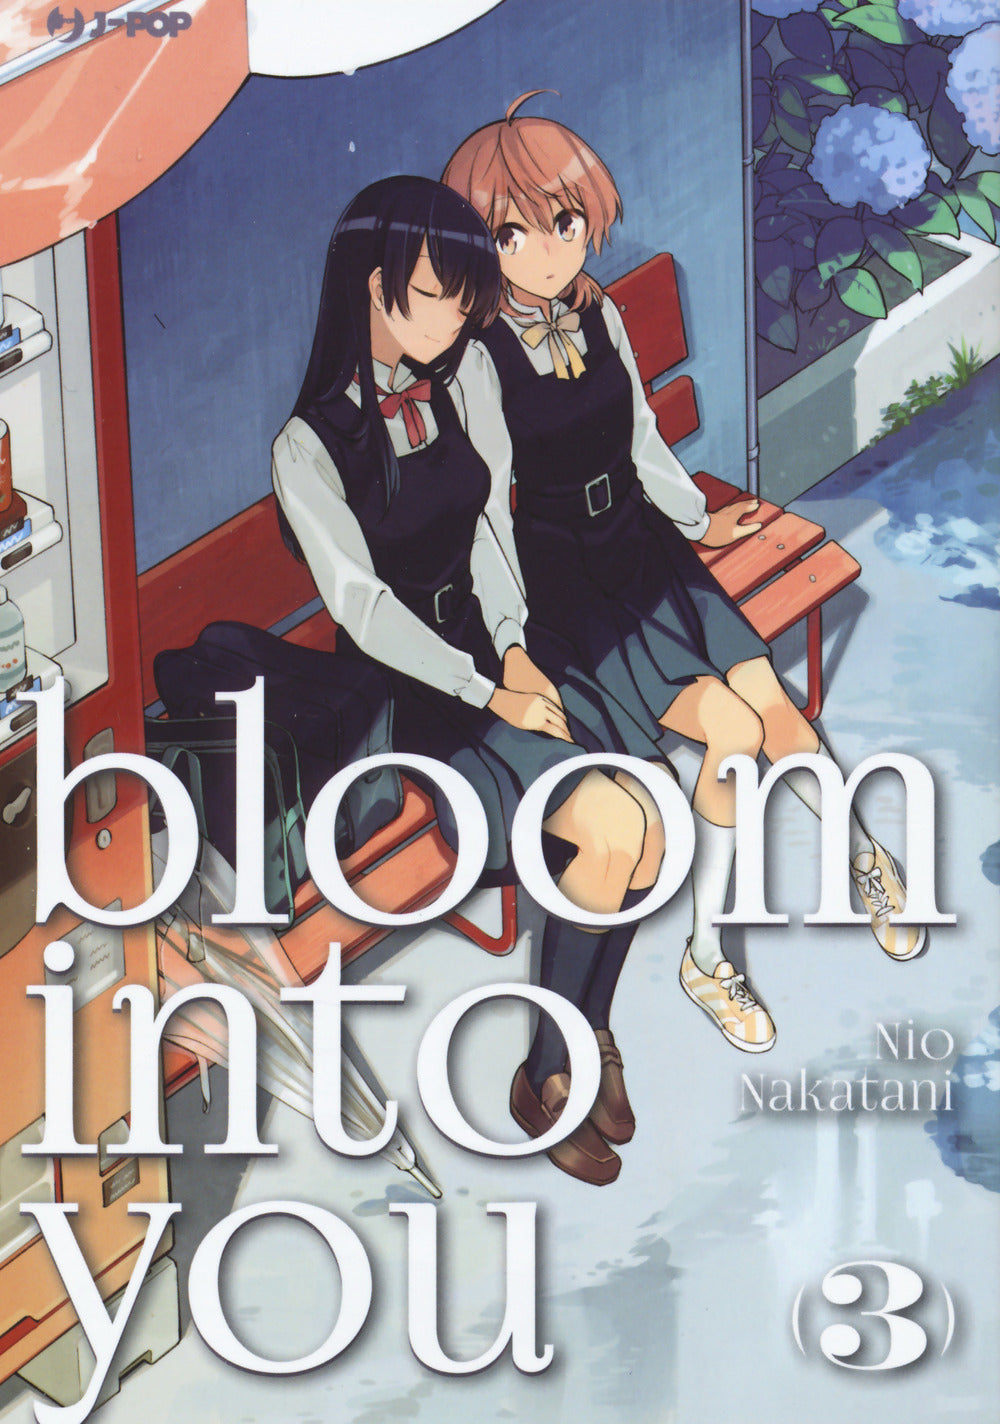 Bloom into you. Vol. 3.